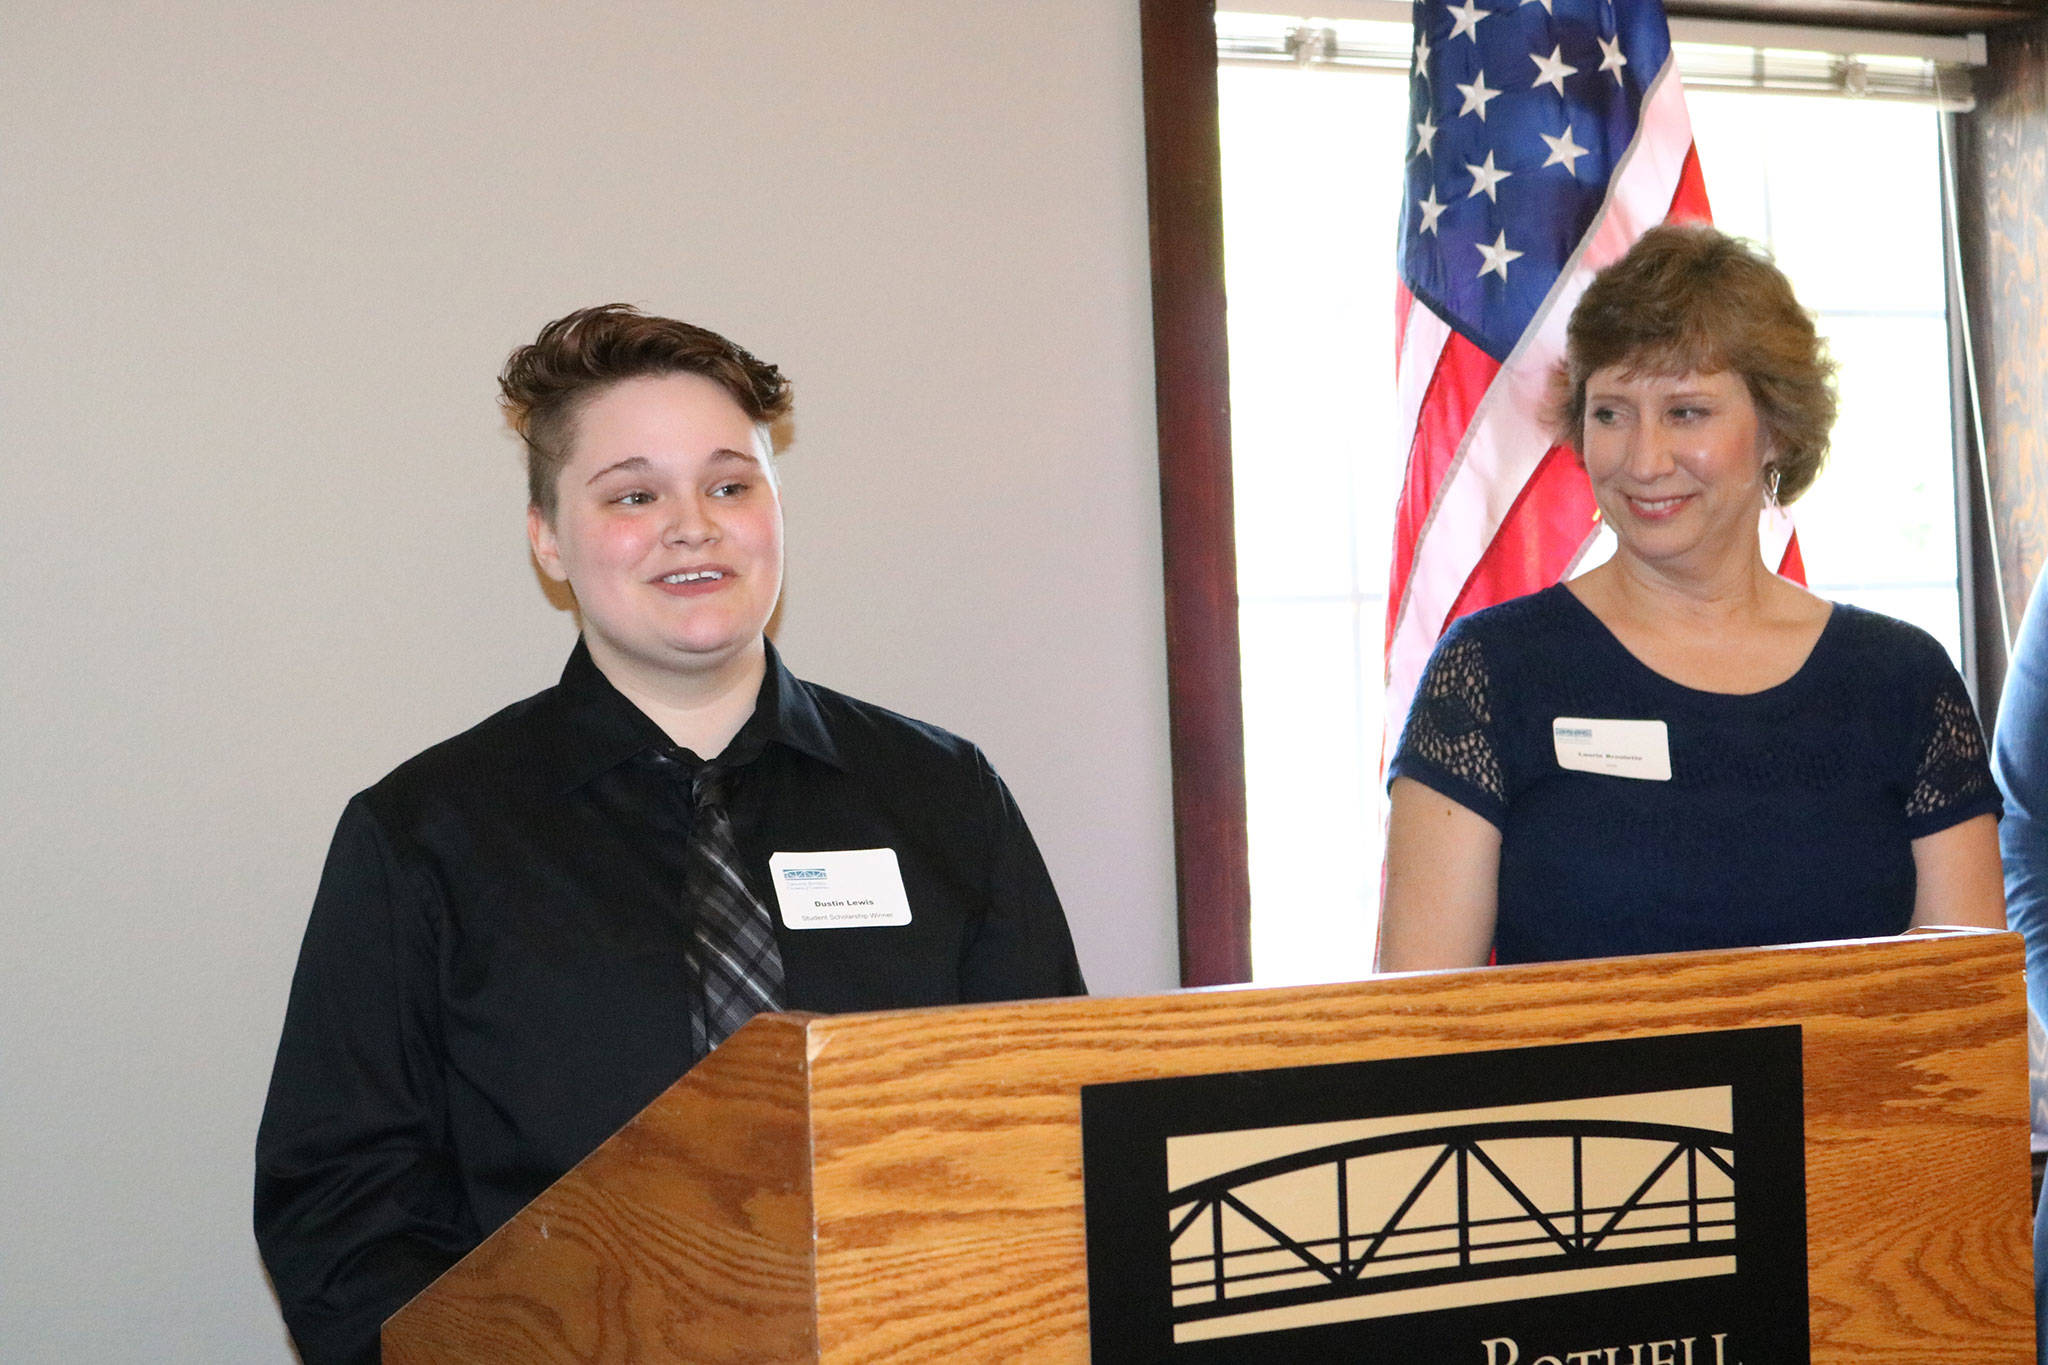 Secondary Academy for Success (SAS) student Dustin Lewis speaks after receiving this year’s Greater Bothell Chamber of Commerce scholarship. SAS counselor Laurie Broulette is at his side. SAMANTHA PAK, Bothell Reporter